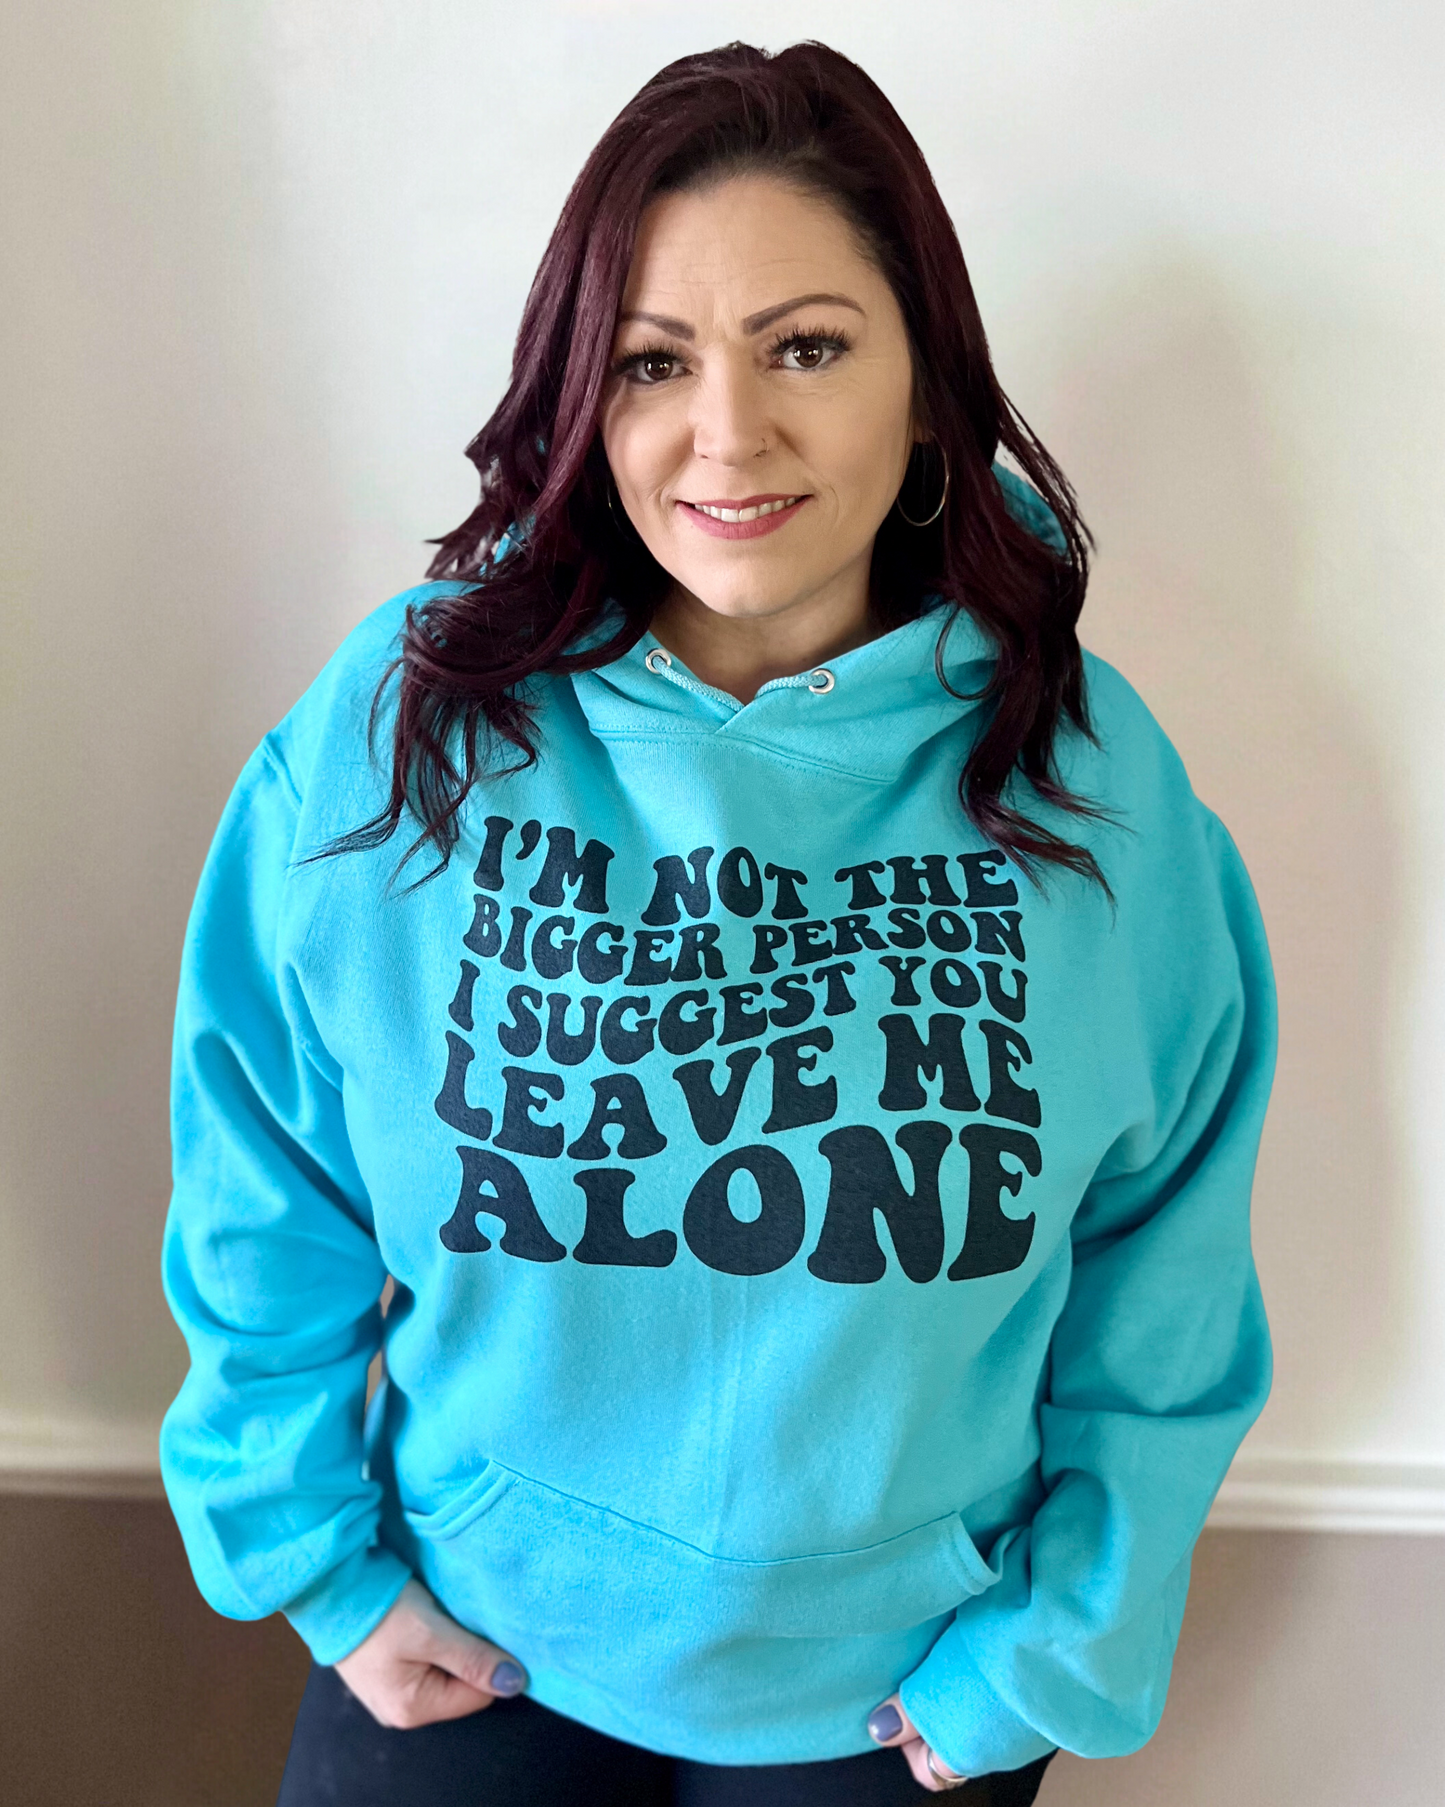 I'm not the bigger person I suggest you leave me alone | sweatshirt